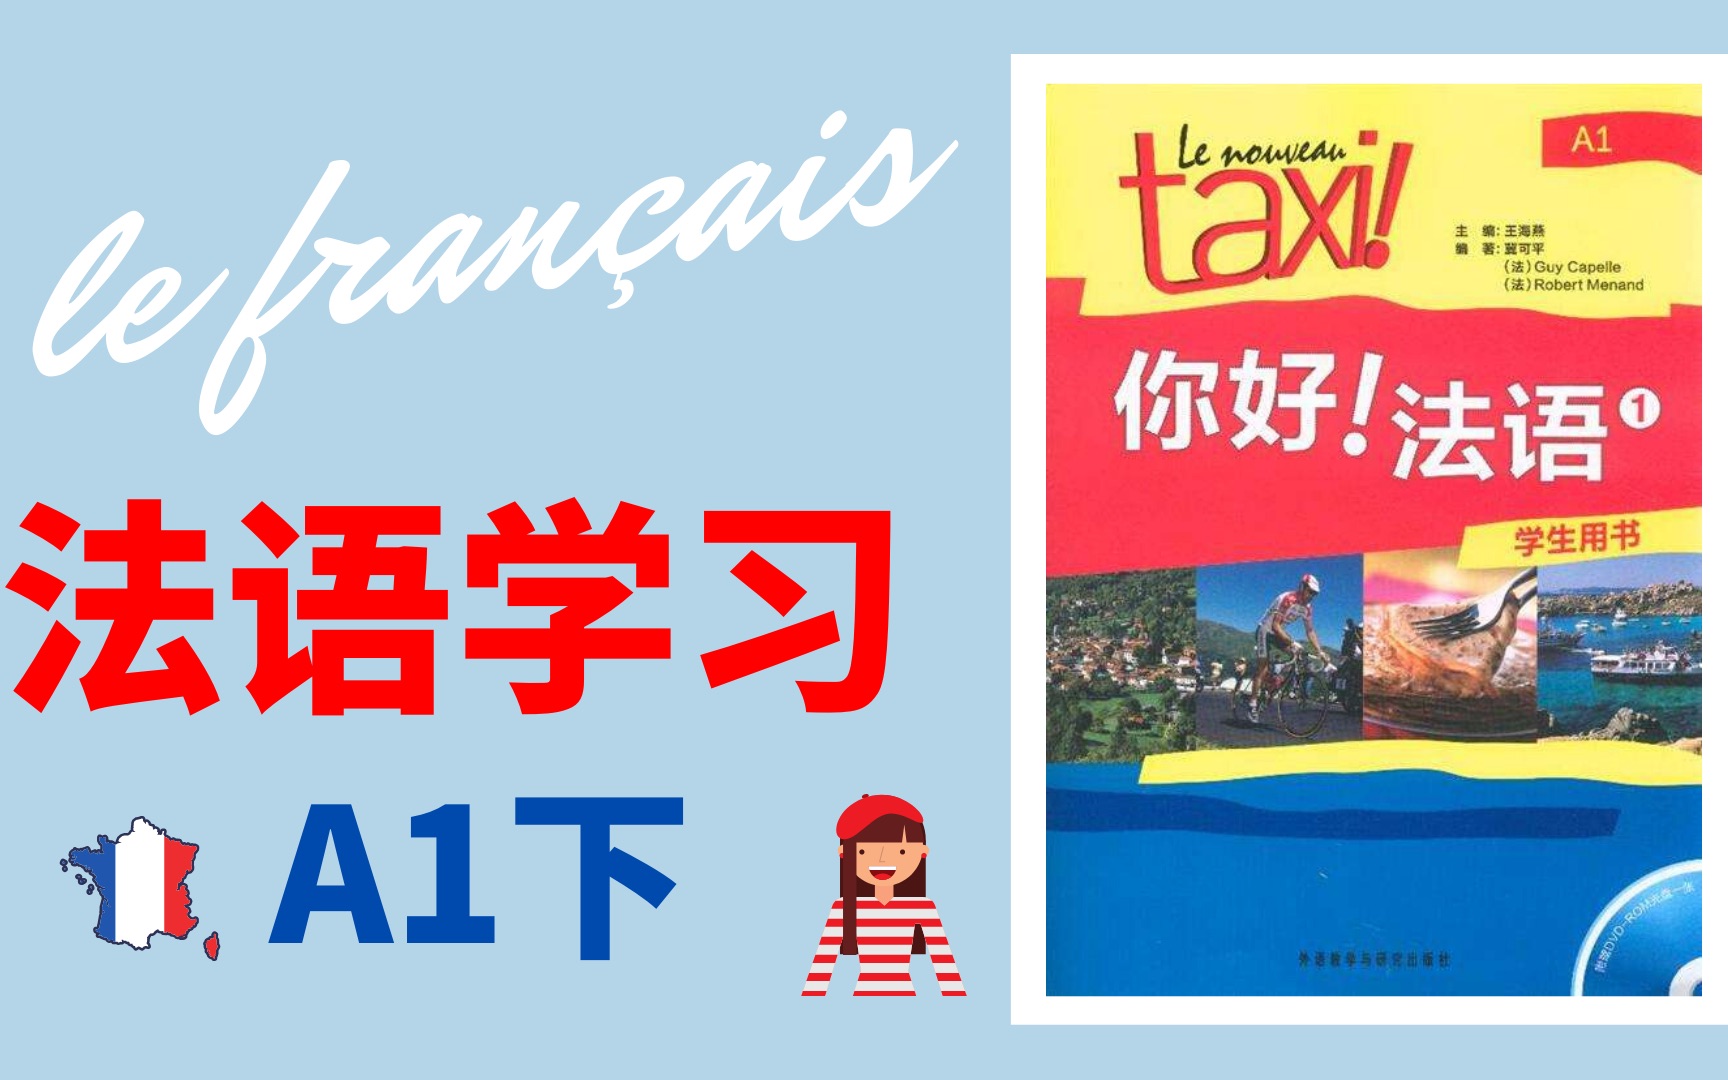 Hello in French Language /法语单词Bonjour in Speech Bubble插画图片素材_ID:123555615-Veer图库